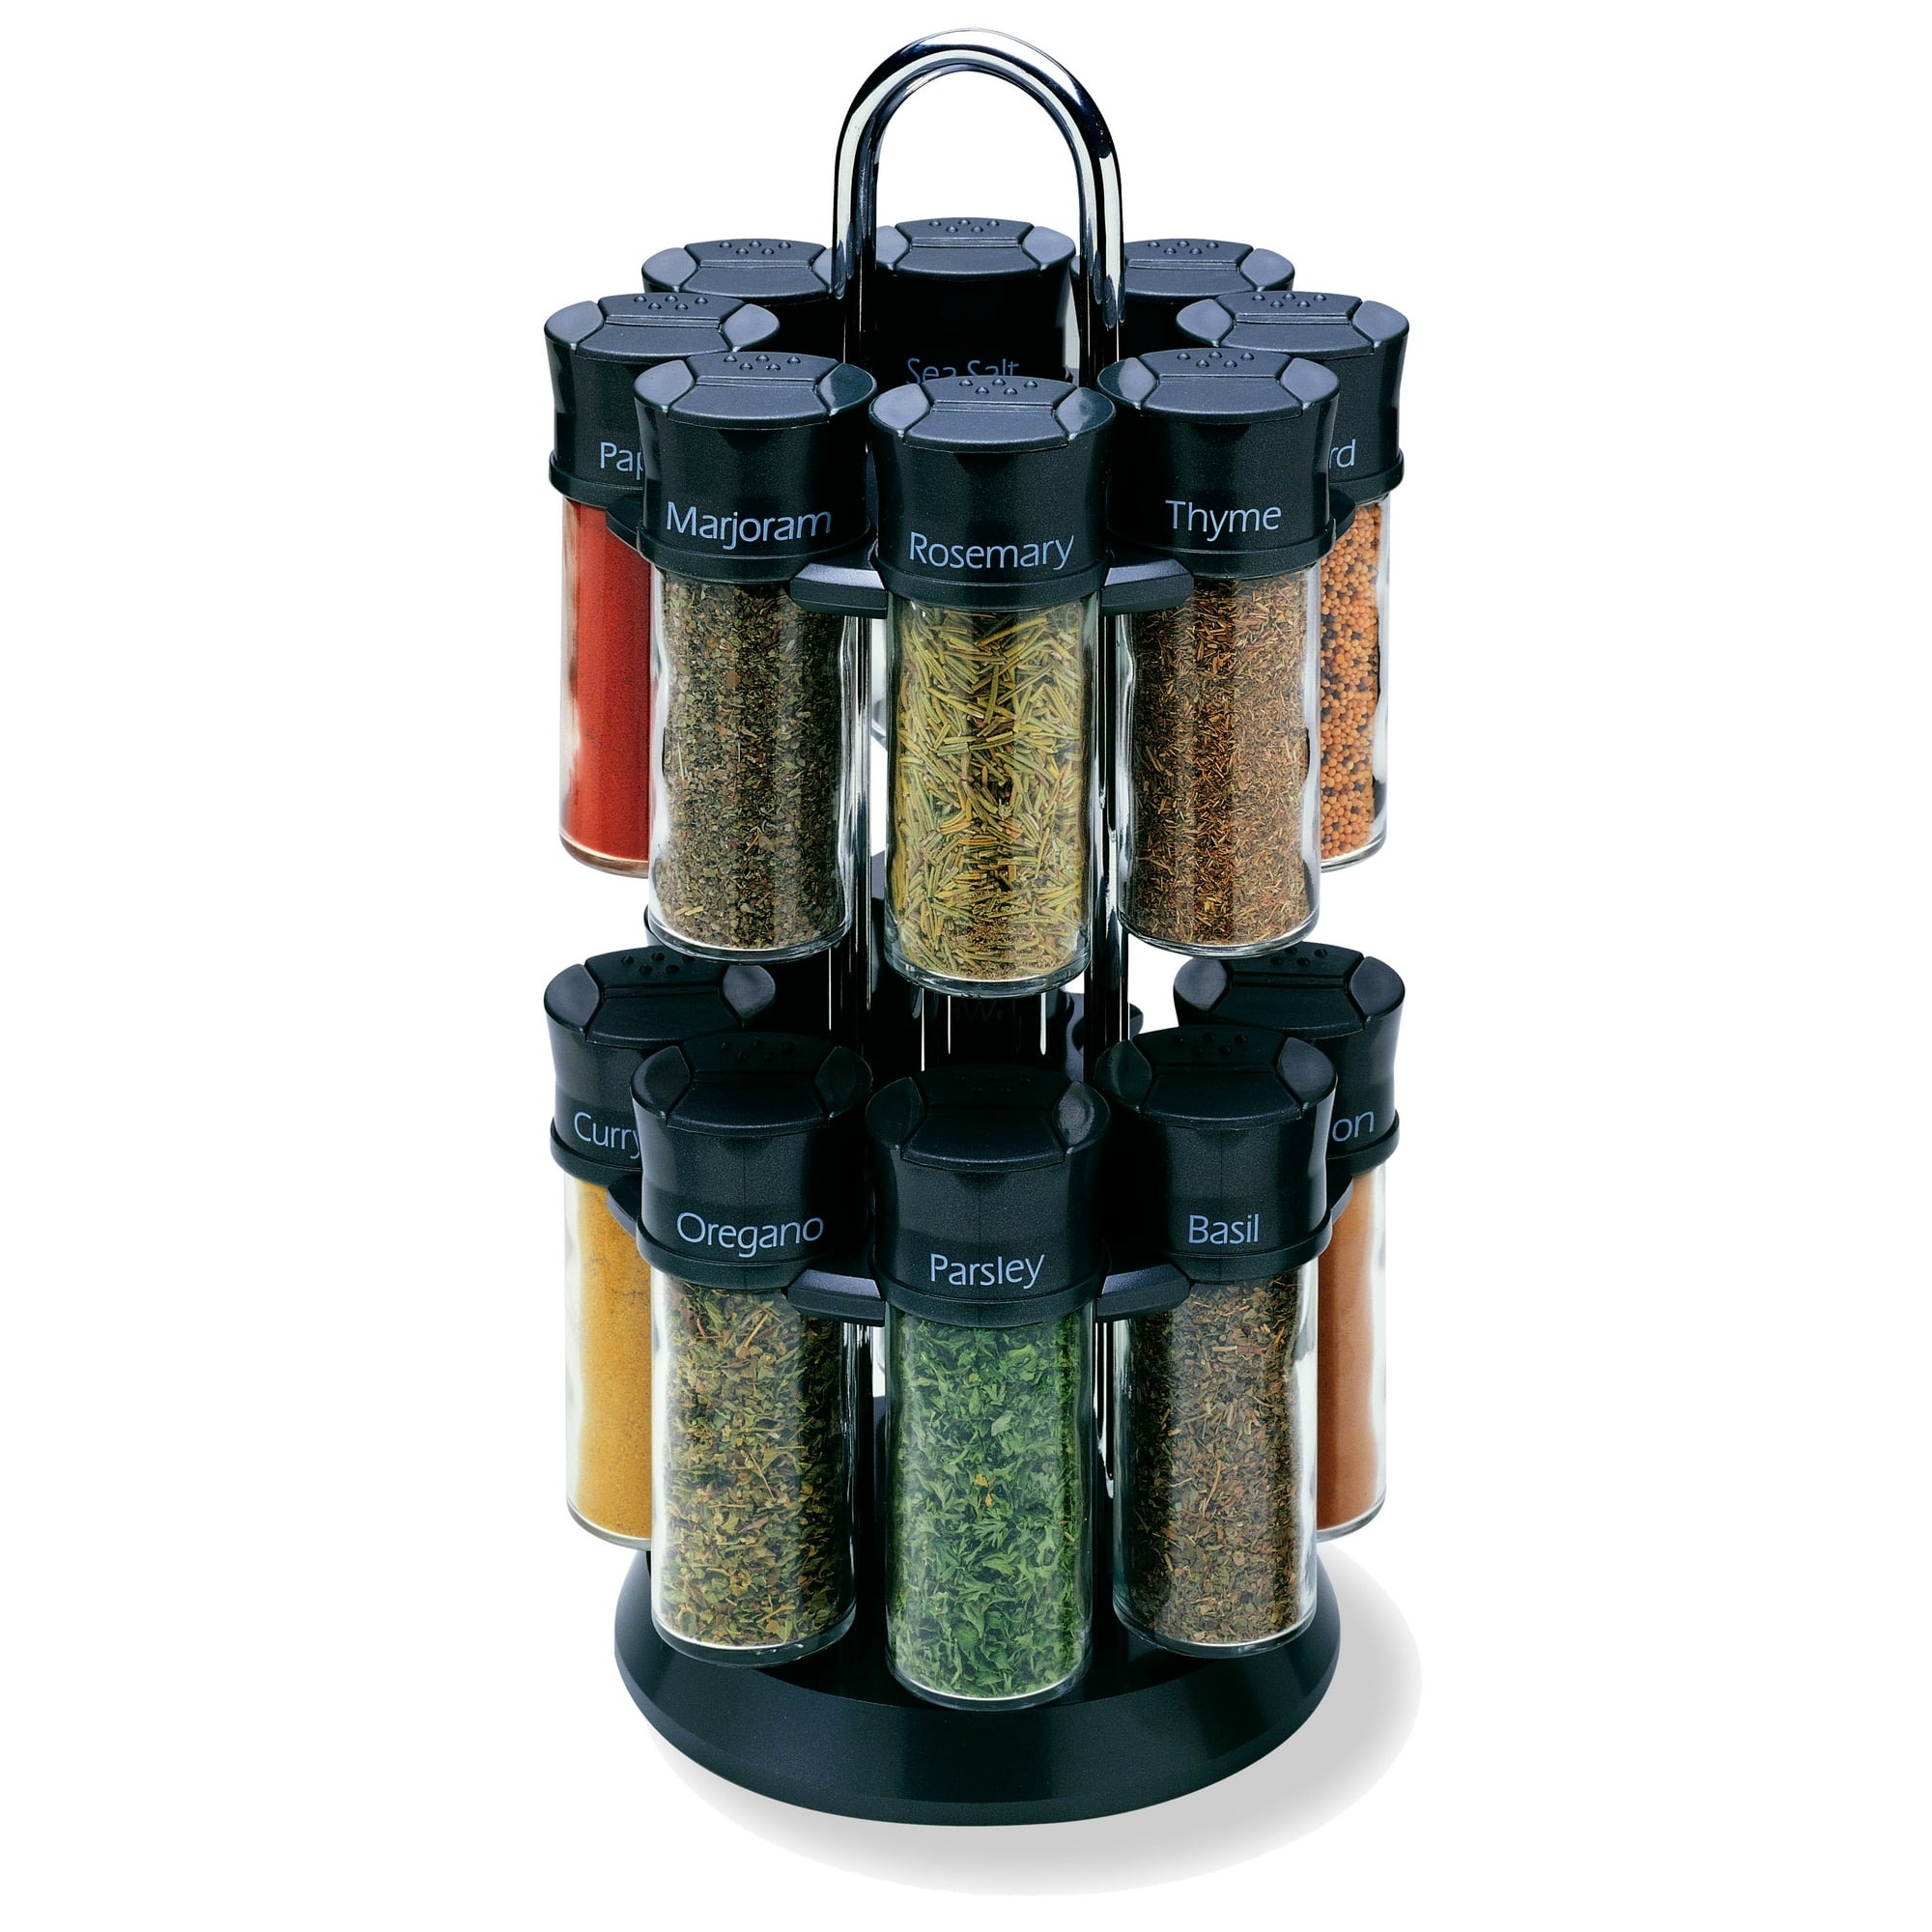 the jars of spices on a rotating holder